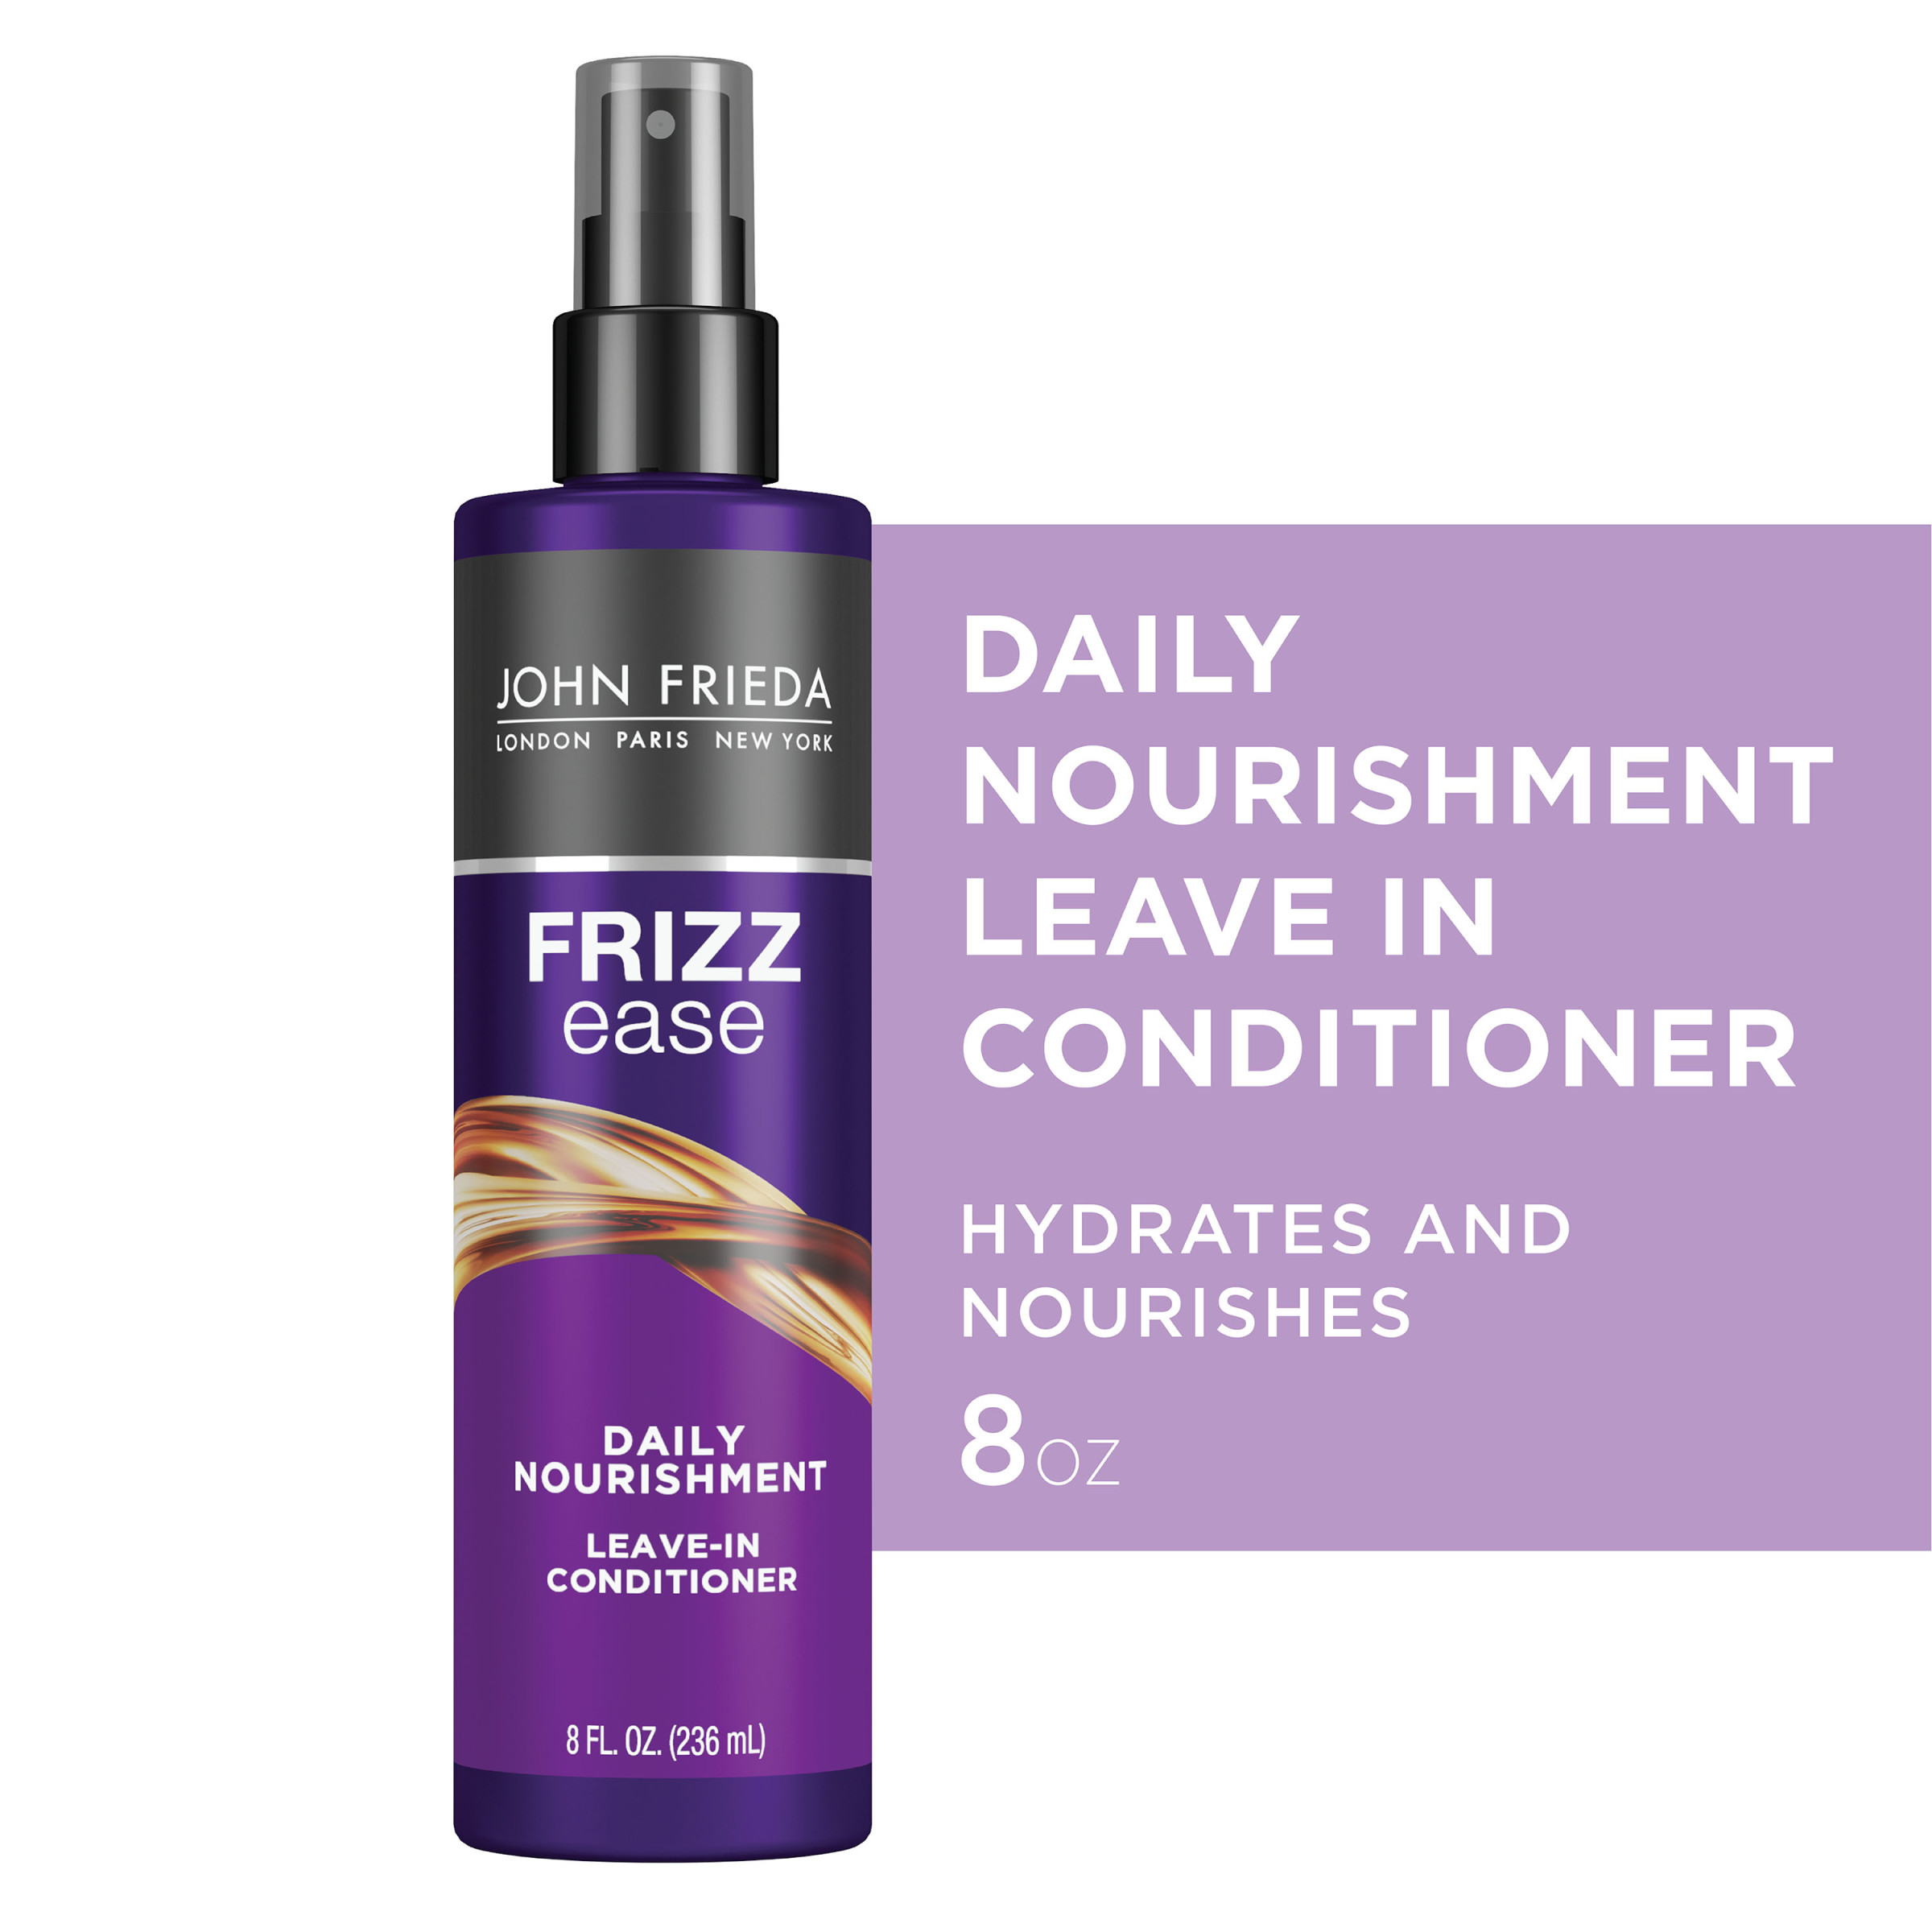 John Frieda Anti Frizz, Frizz Ease Daily Nourishment Leave In Conditioner for Frizzy, Dry Hair, 8 fl oz - image 1 of 10